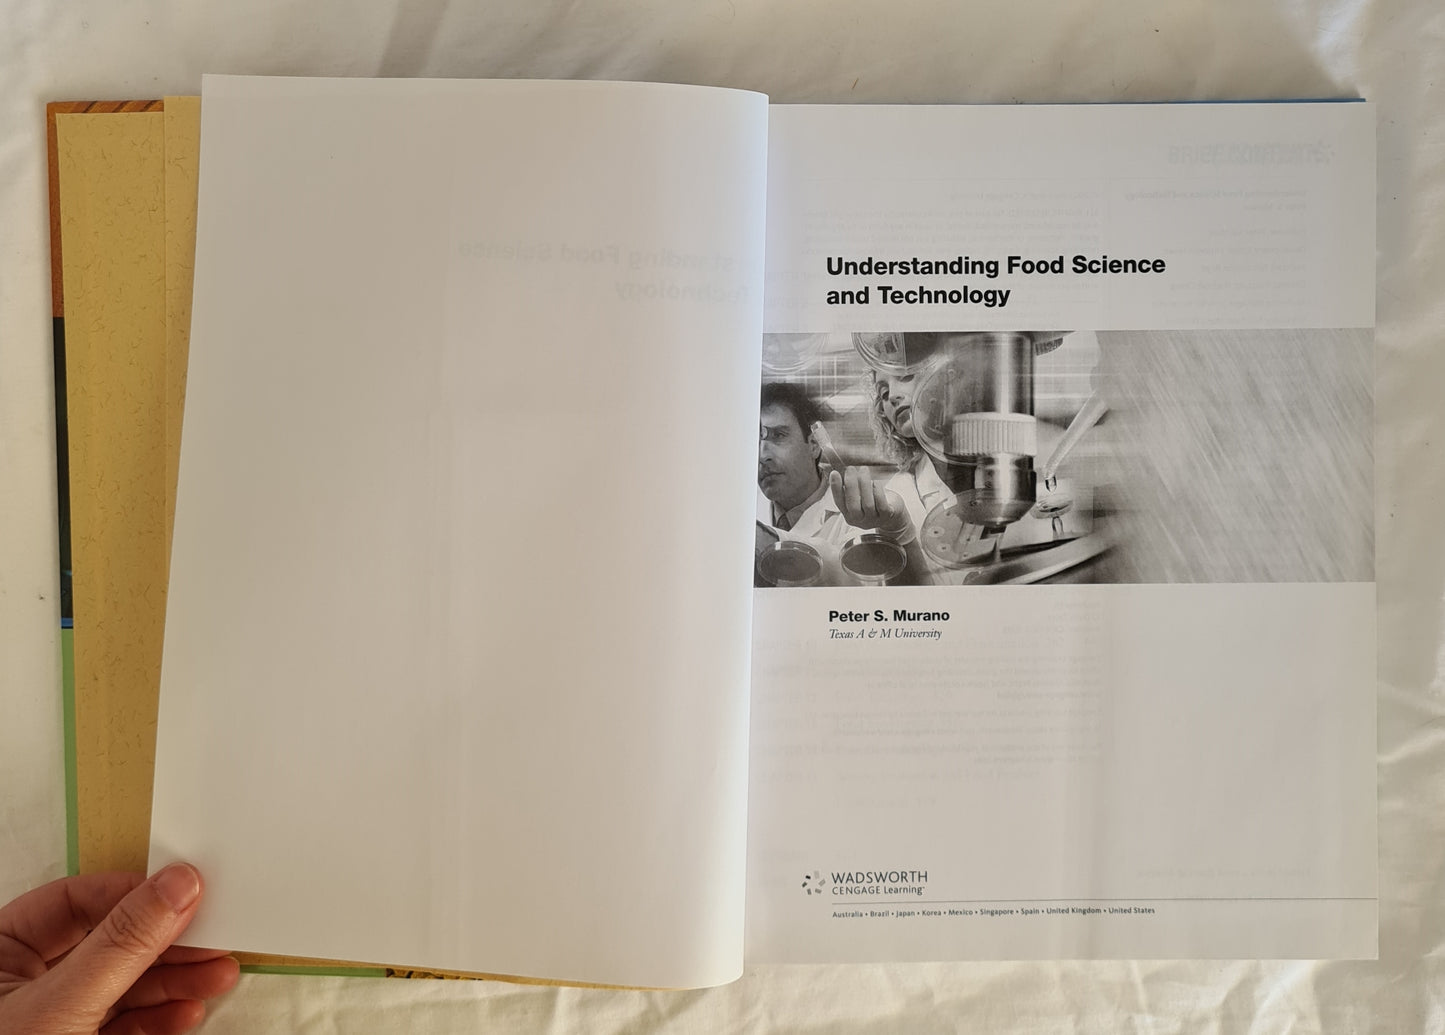 Understanding Food Science and Technology by Peter S. Murano